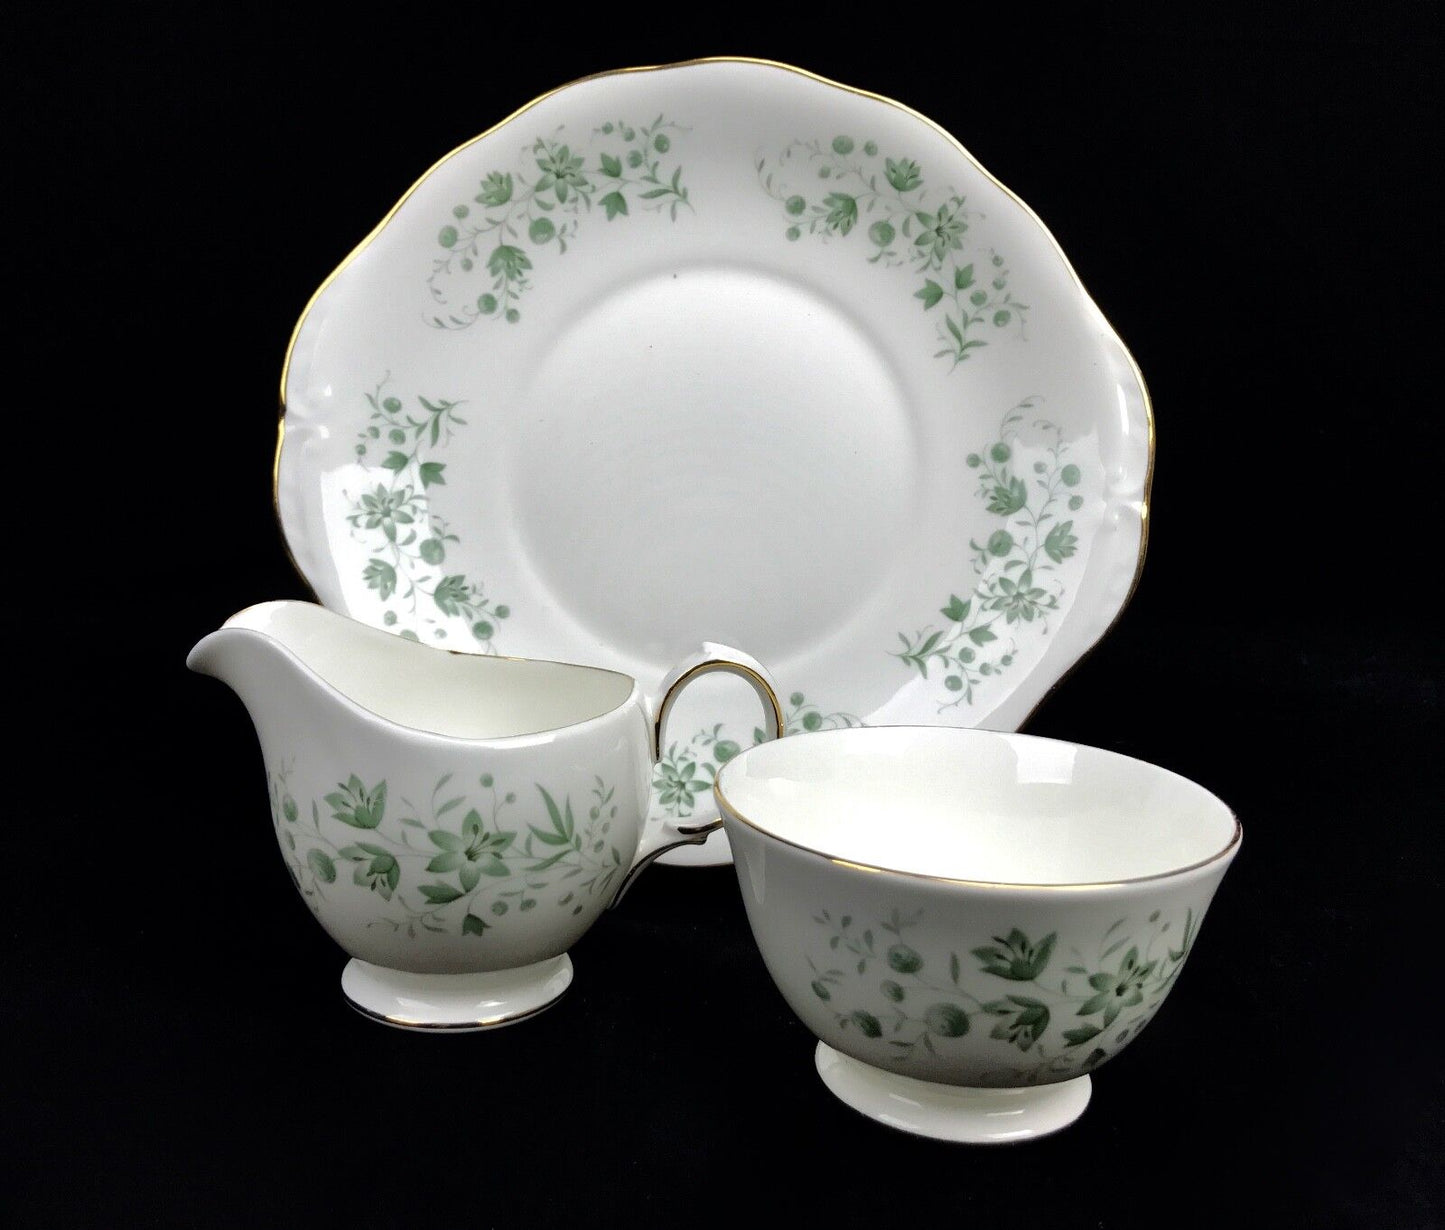 Queen Anne China Tea Set For 6 / 21 Piece / Pattern 8669 Green Floral / Trio